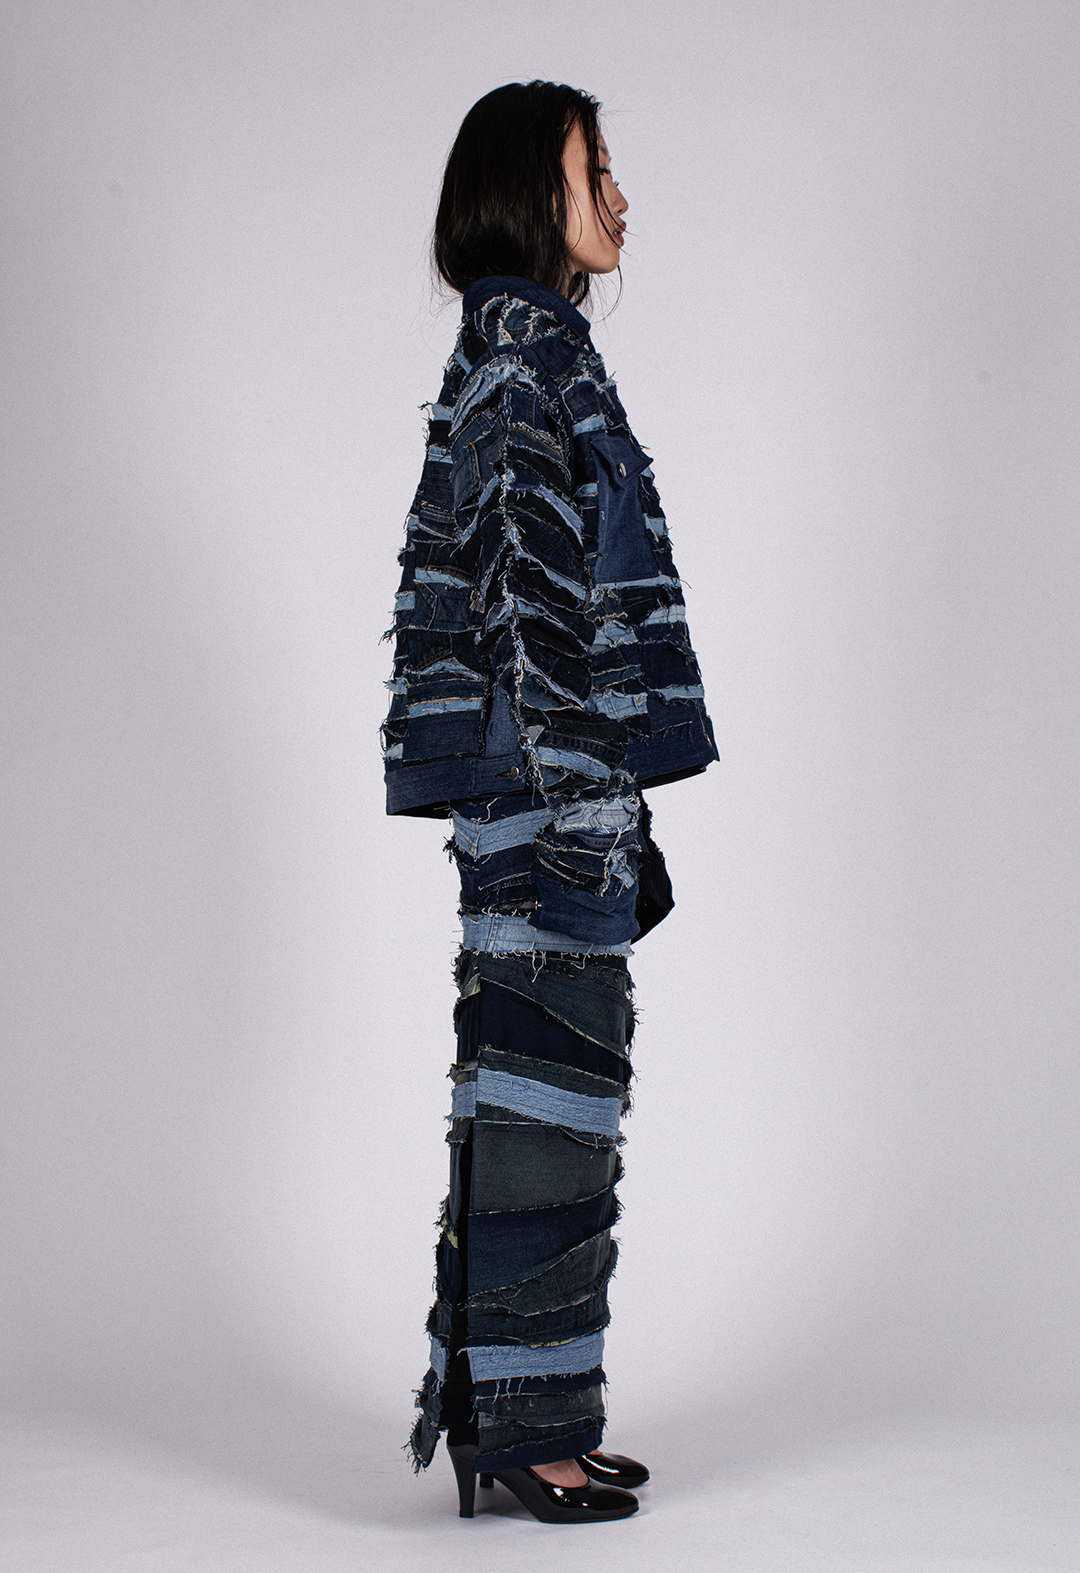 The photo shows a side view of the model in the "Trucker" jacket. The vintage denim in the jacket has different textures and colors, and ultimately, each piece makes a new color and texture.